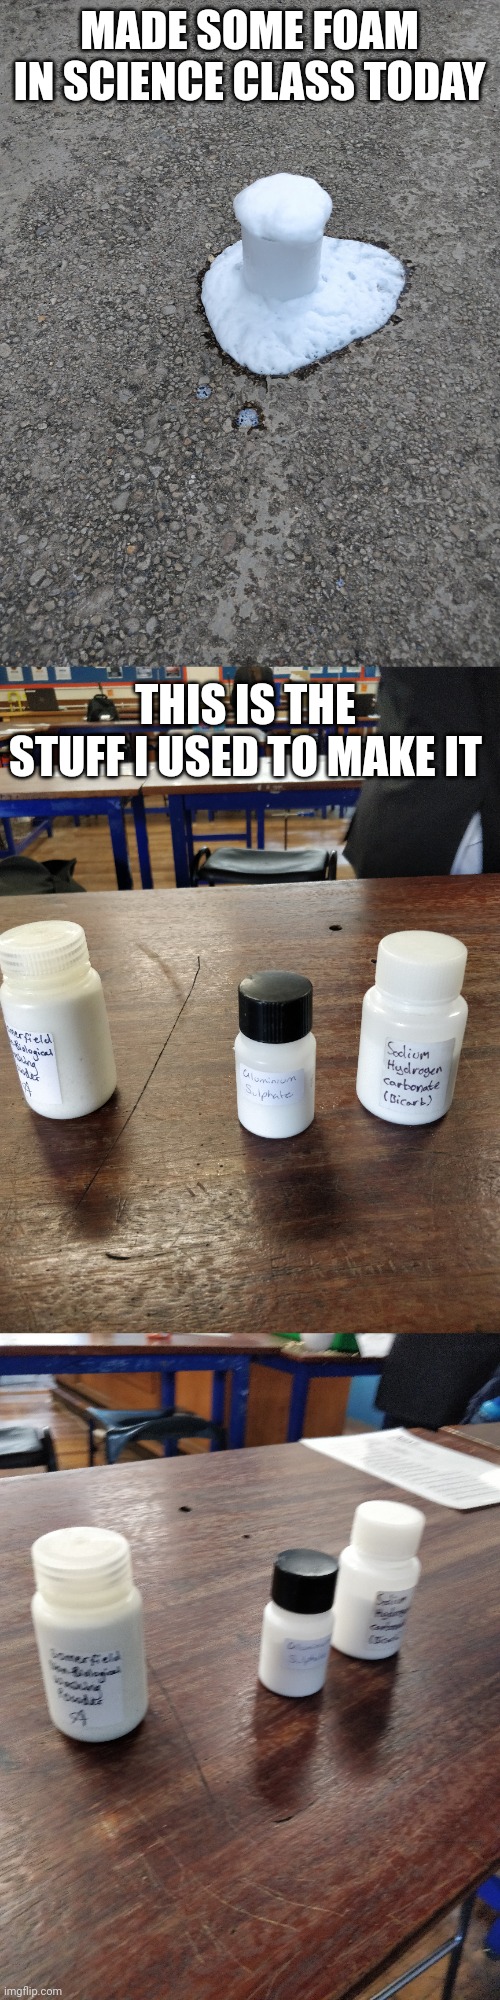 MADE SOME FOAM IN SCIENCE CLASS TODAY; THIS IS THE STUFF I USED TO MAKE IT | made w/ Imgflip meme maker